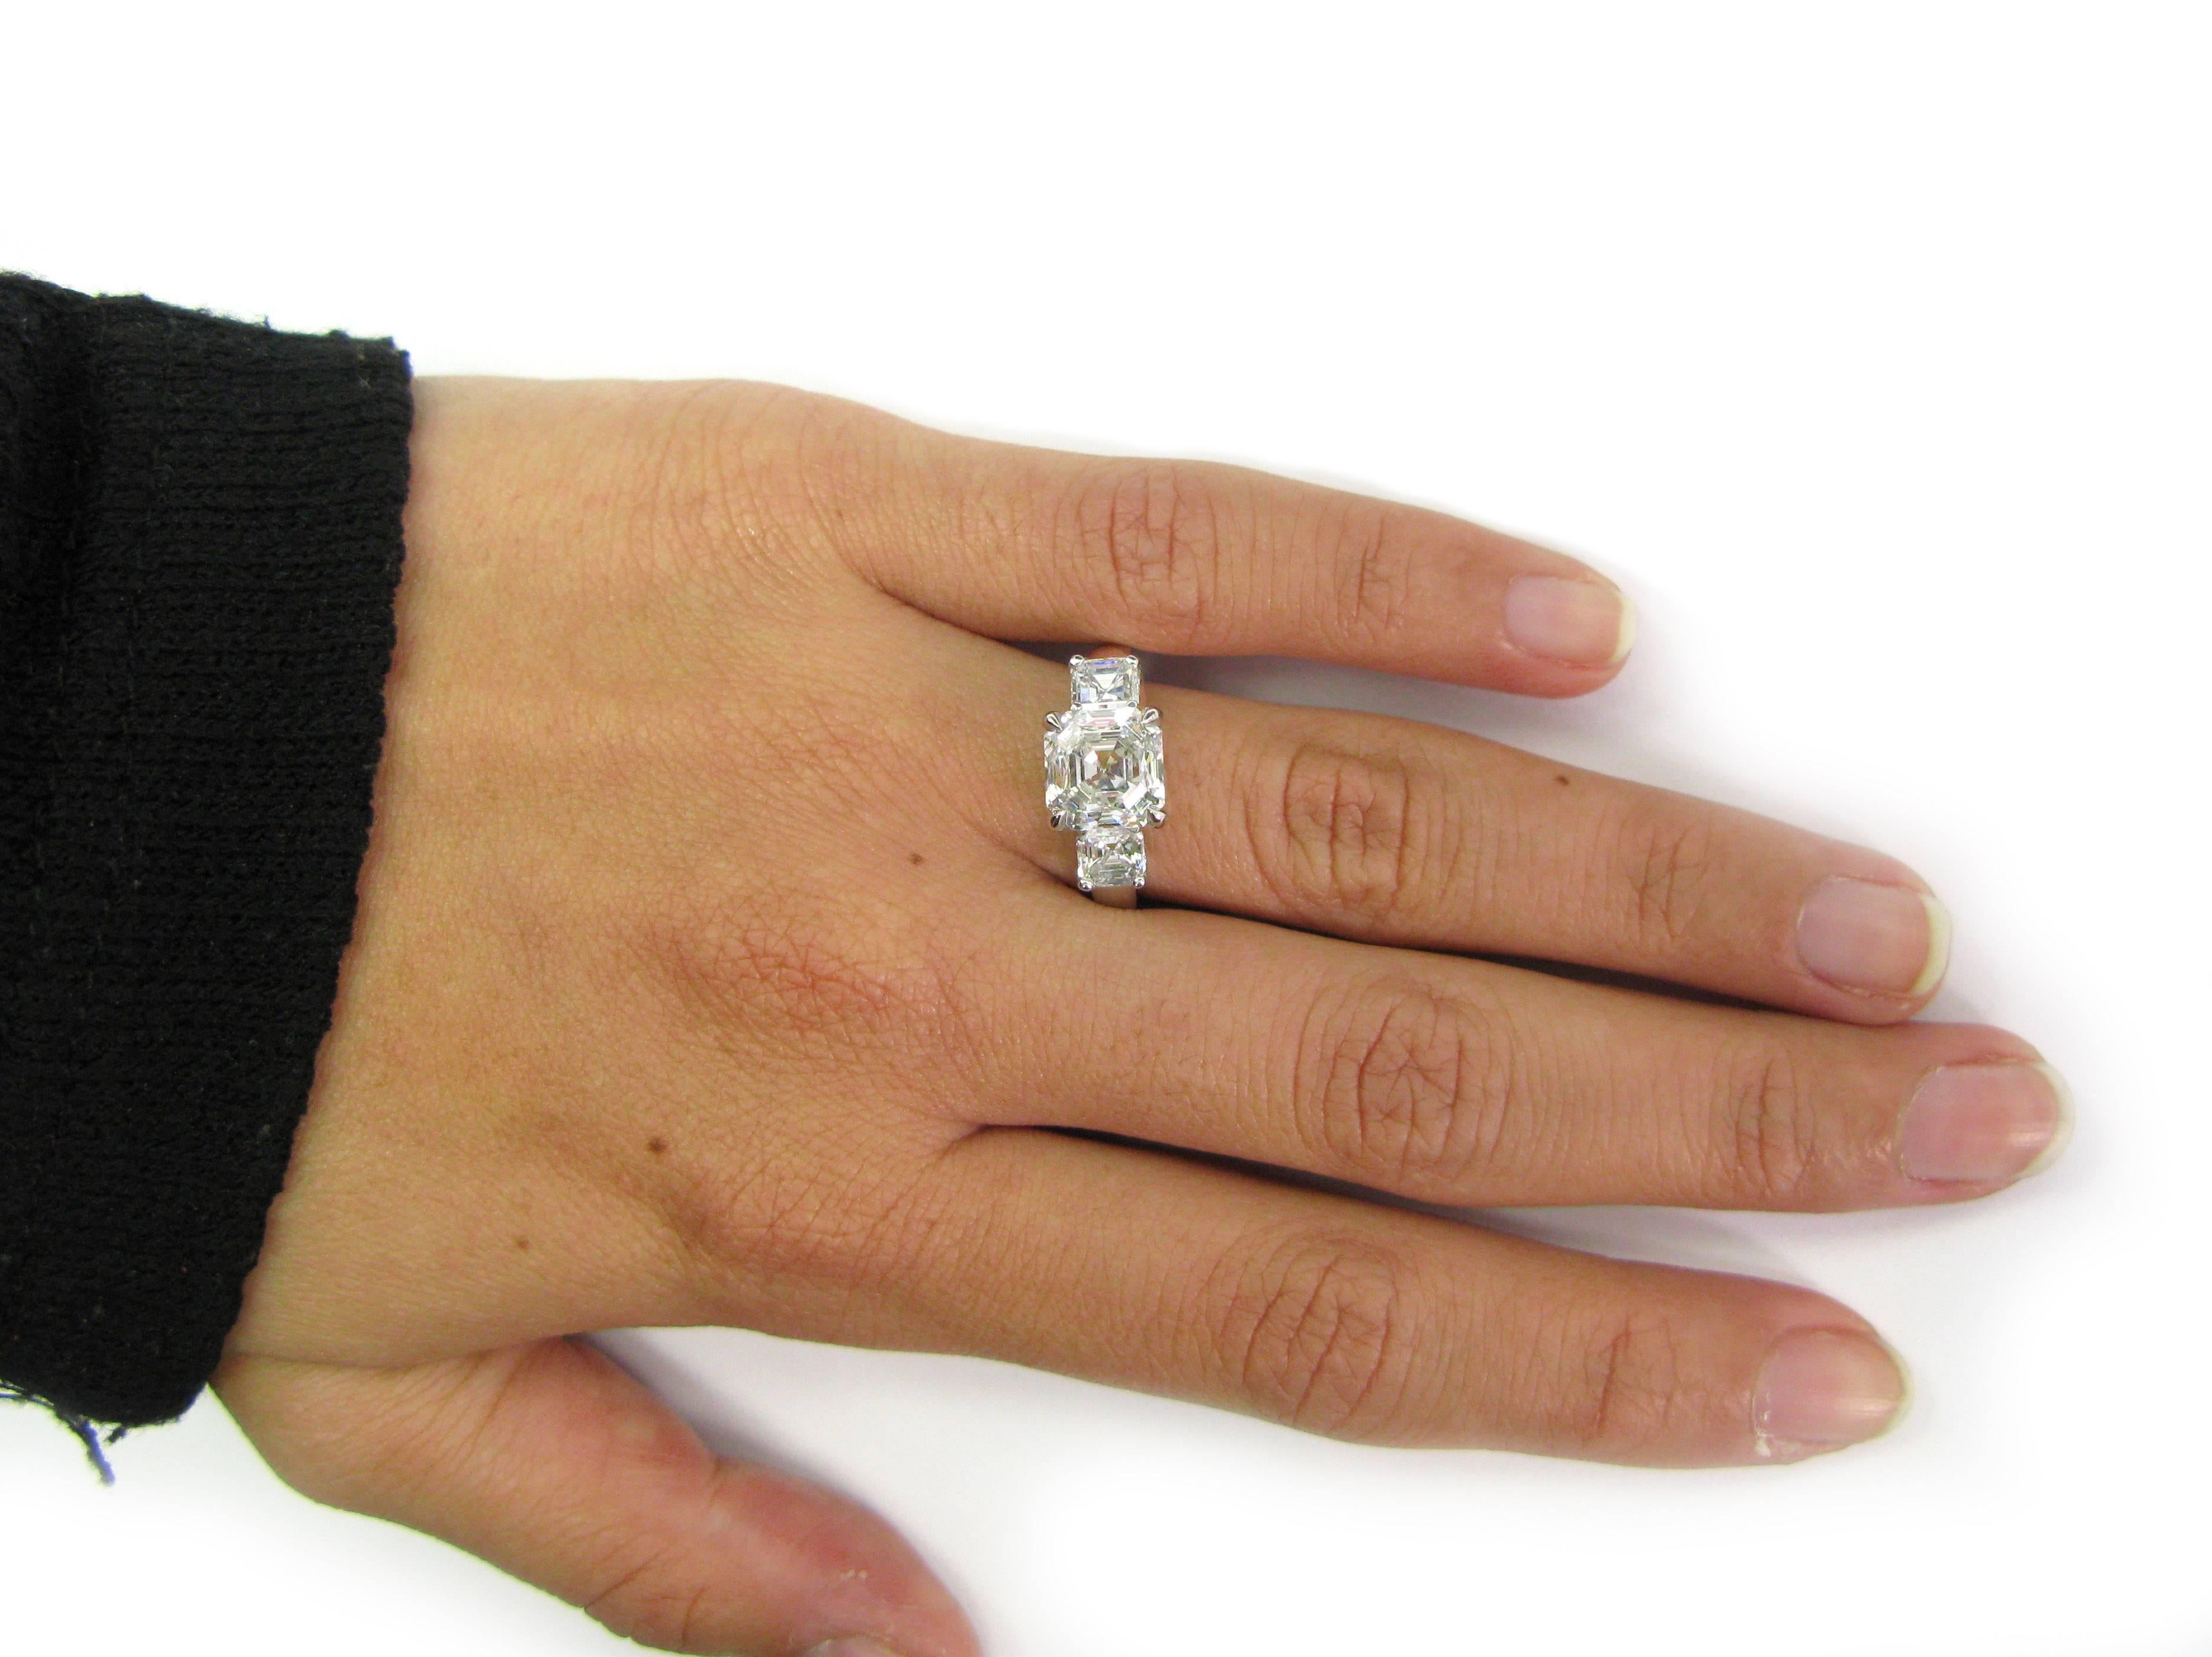 This lovely handmade platinum ring features 3.01 carat, F color, VS1 clarity, Asscher-cut diamond center stone flanked by two smaller Asscher-cut diamonds totaling approx. 0.95 ctw. This stunning piece would make a perfect engagement or anniversary